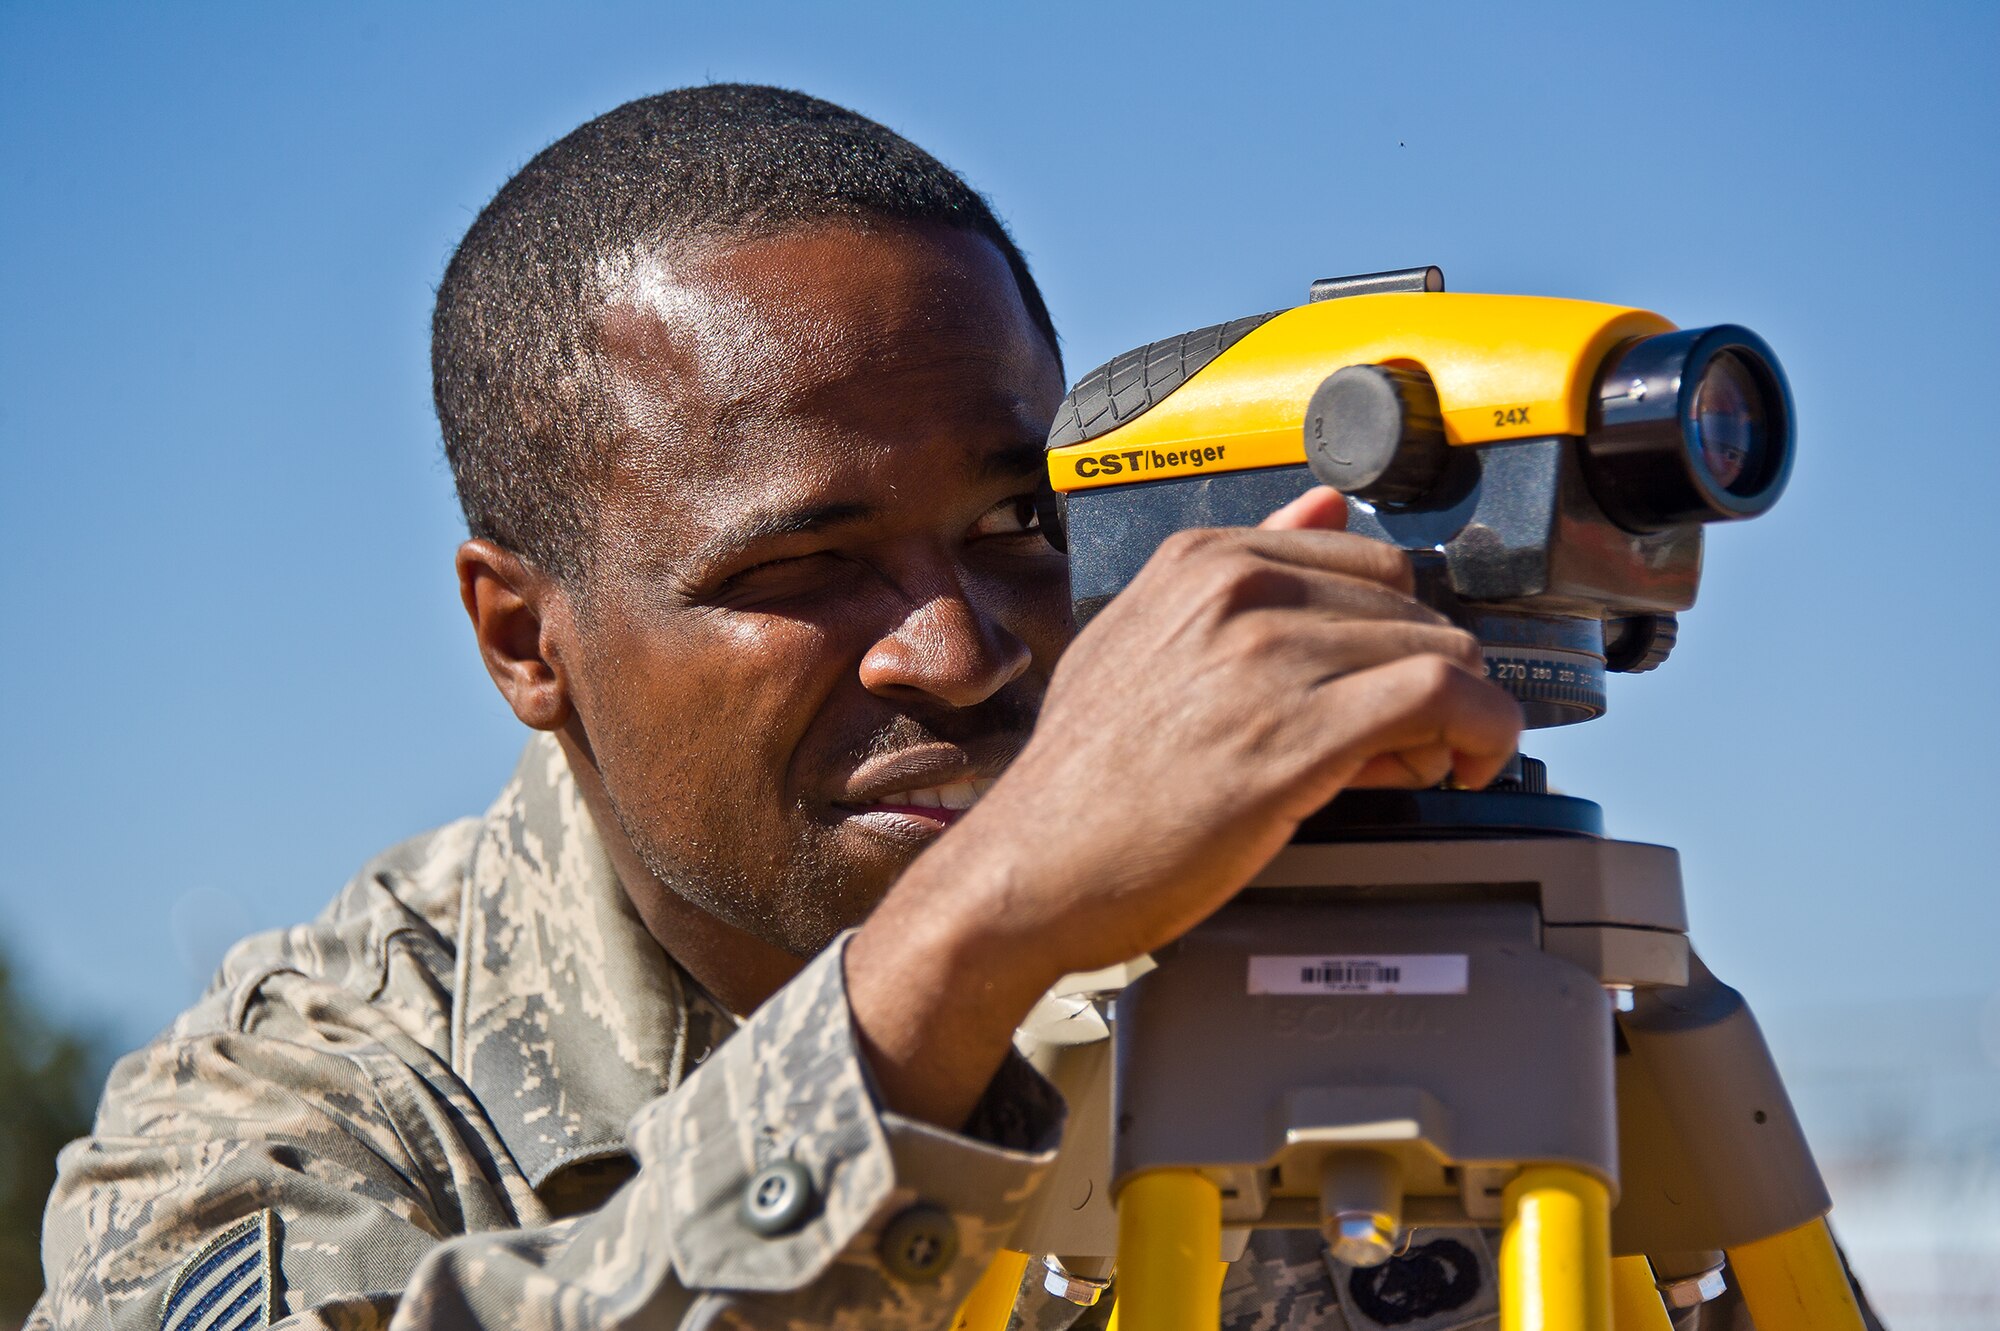 Tech. Sgt. Antonio Adolphues, 116th Civil Engineering Squadron, Robins Air Force Base, Ga., use an auto level to take measurements during a construction project at St. Michaels Association for Special Education, Window Rock, Ariz., June 9, 2011.  Adolphues and more than 40 members of his squadron performed work for the Navajo Nation as a part of the Department of Defense Innovative Readiness Training program. (U.S. Air Force photo by Master Sgt. Roger Parsons/Released)